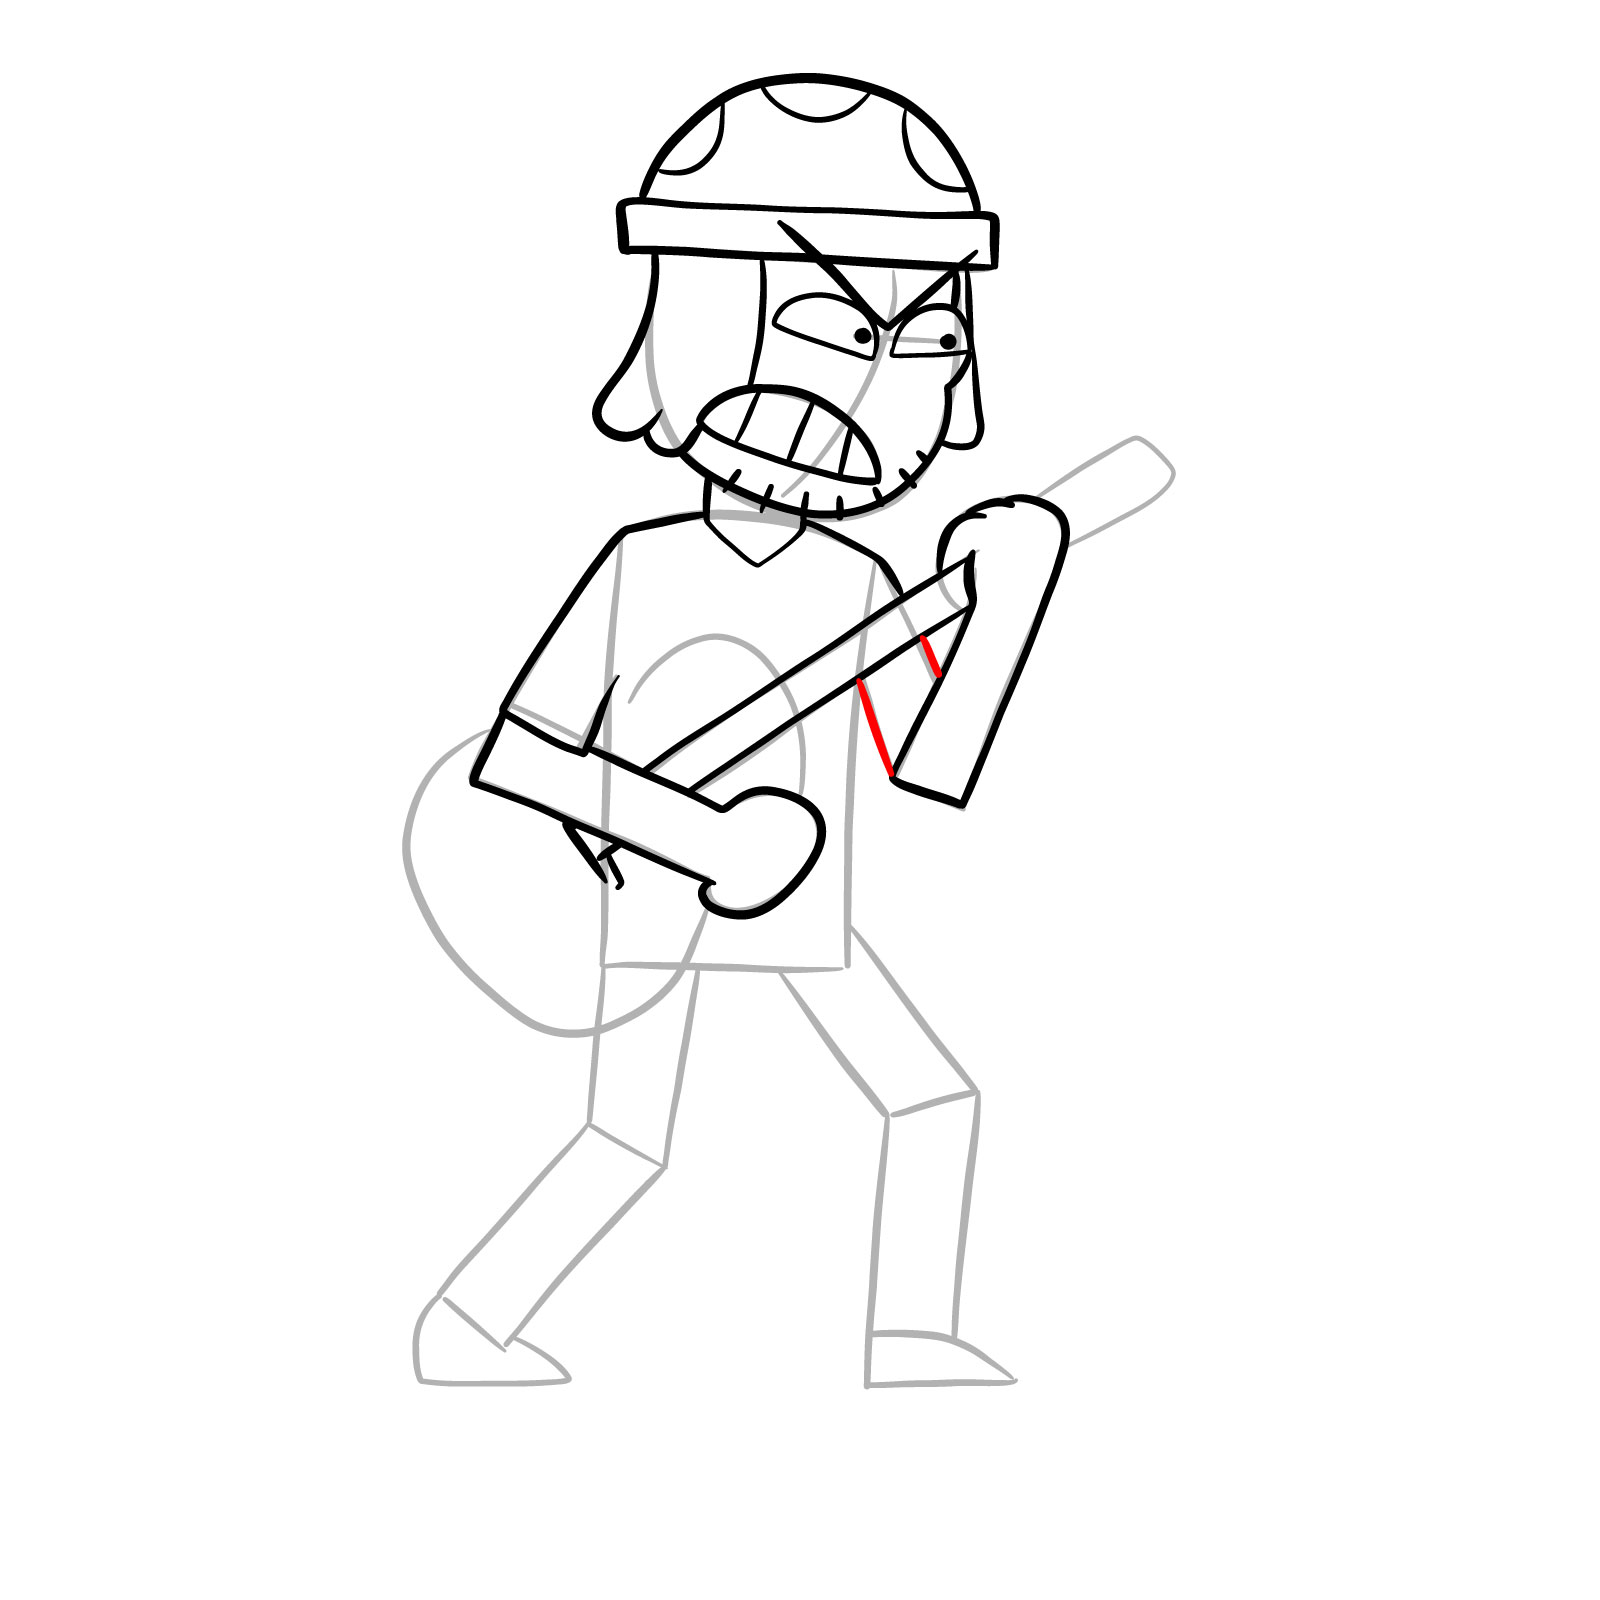 How to draw Suction Cup Man with a guitar - step 16